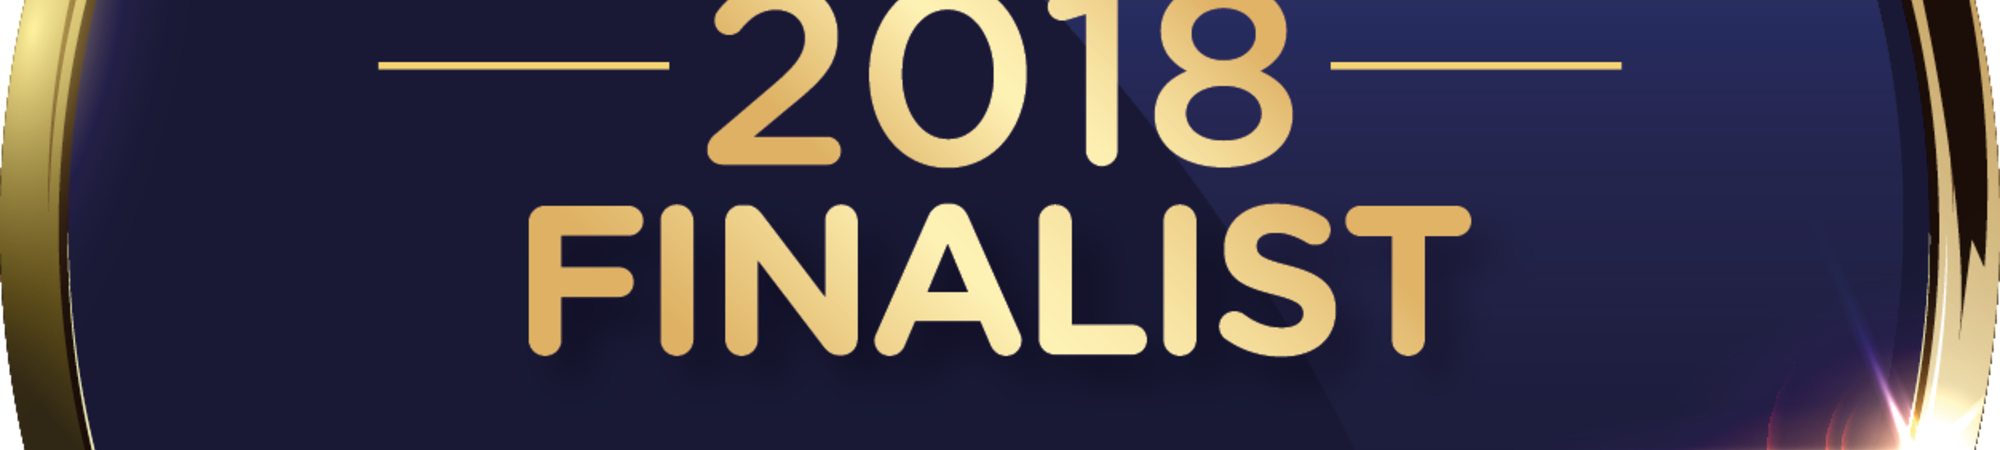 Excellence Award Finalists Medal 2018 Client Init